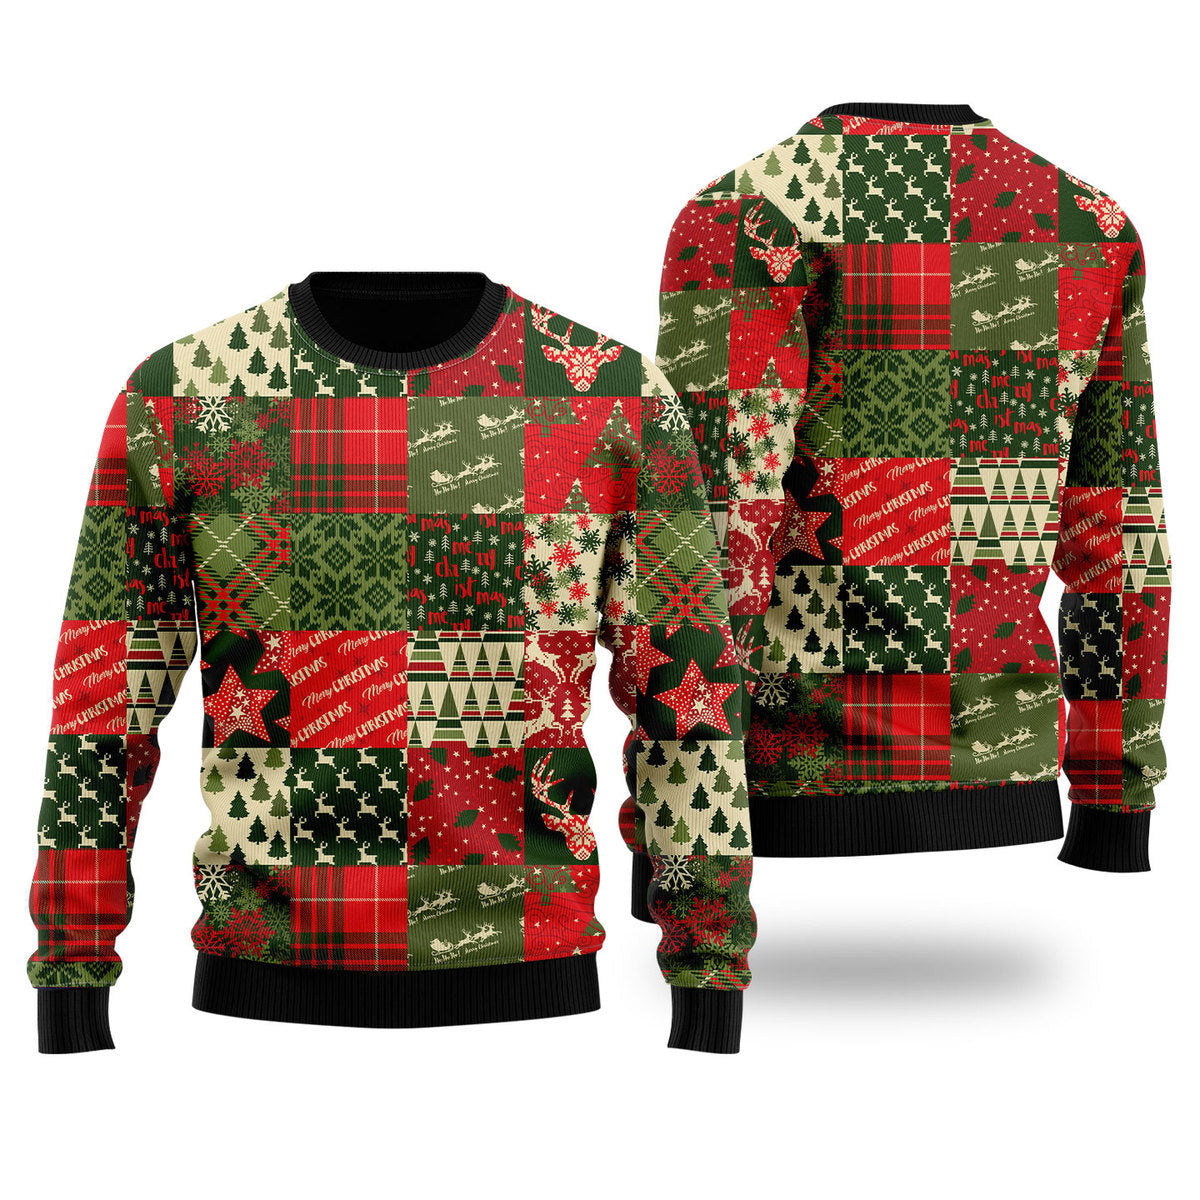 Vintage Christmas Patchwork Ugly Christmas Sweater Ugly Sweater For Men Women